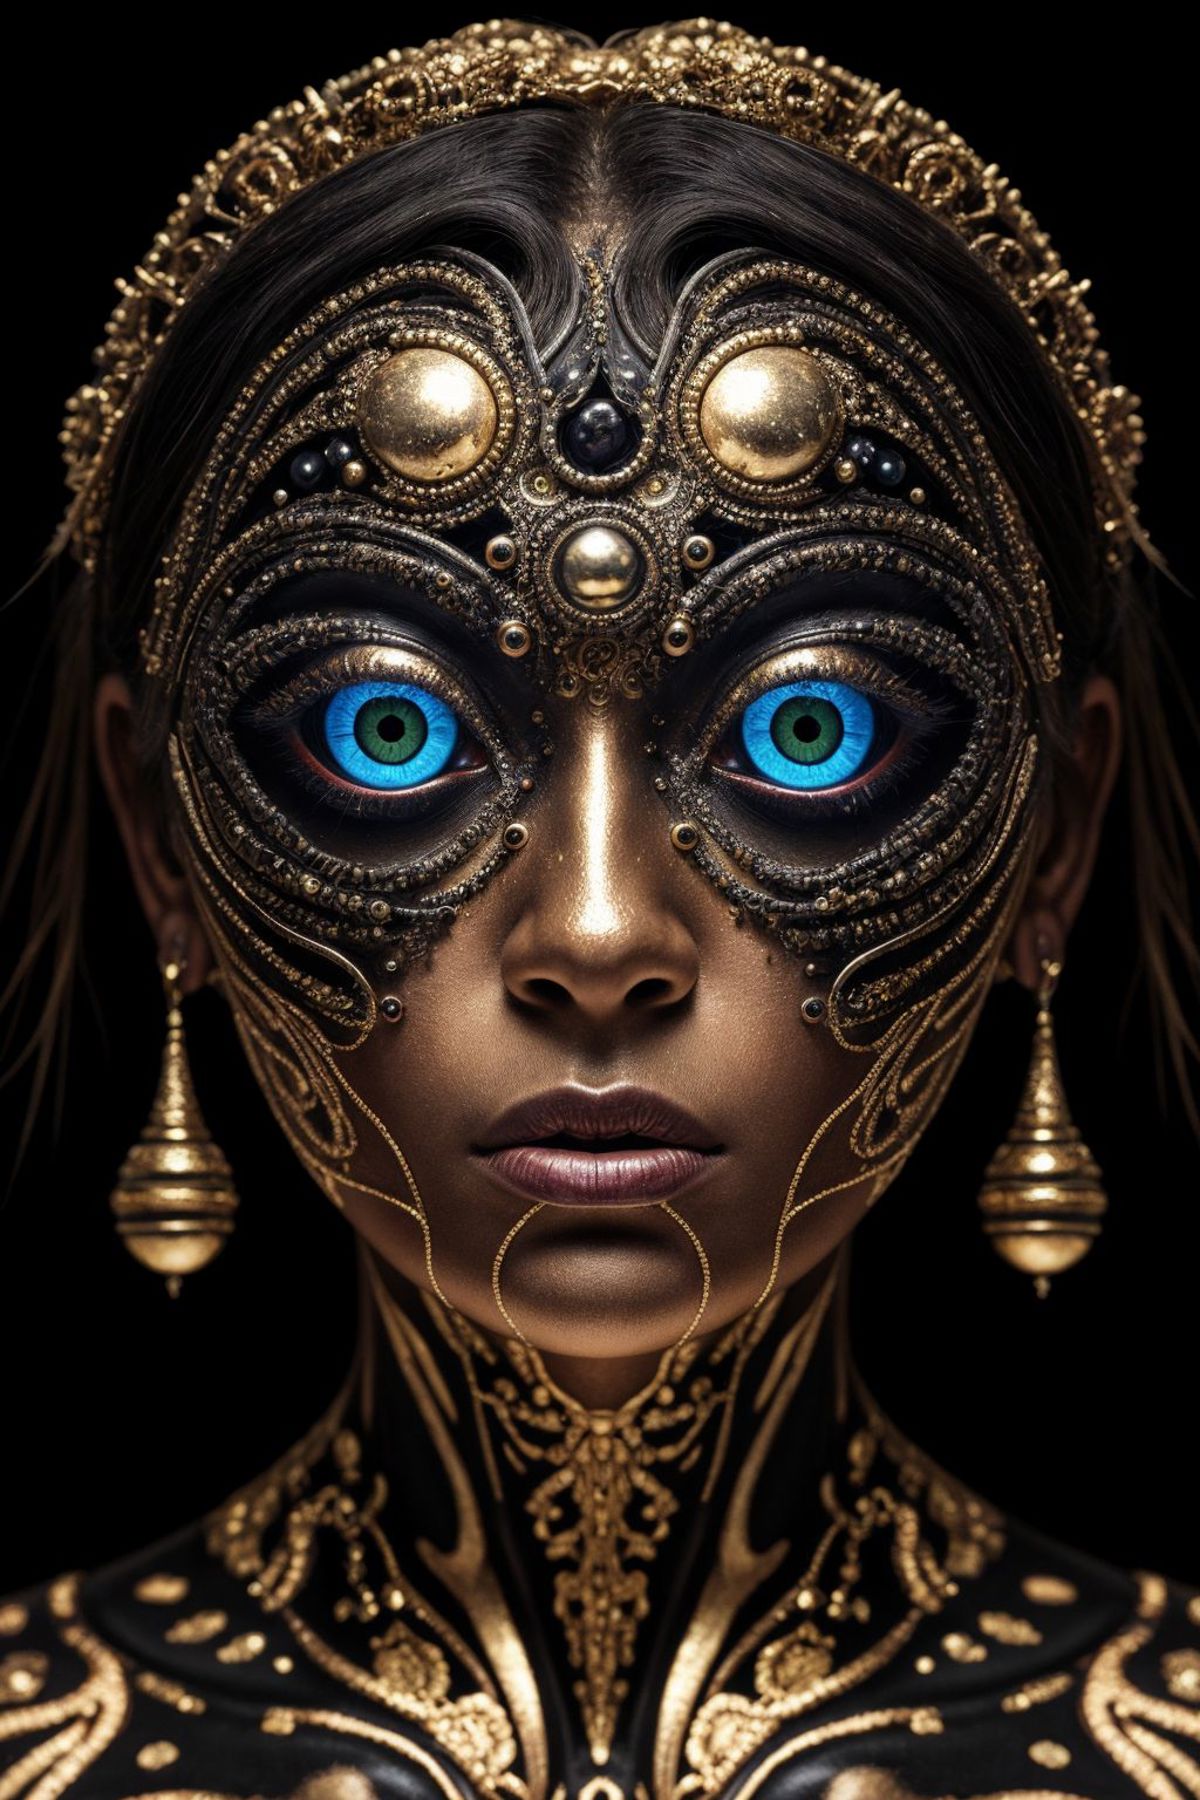 A woman with gold and blue eye shadow on her face.